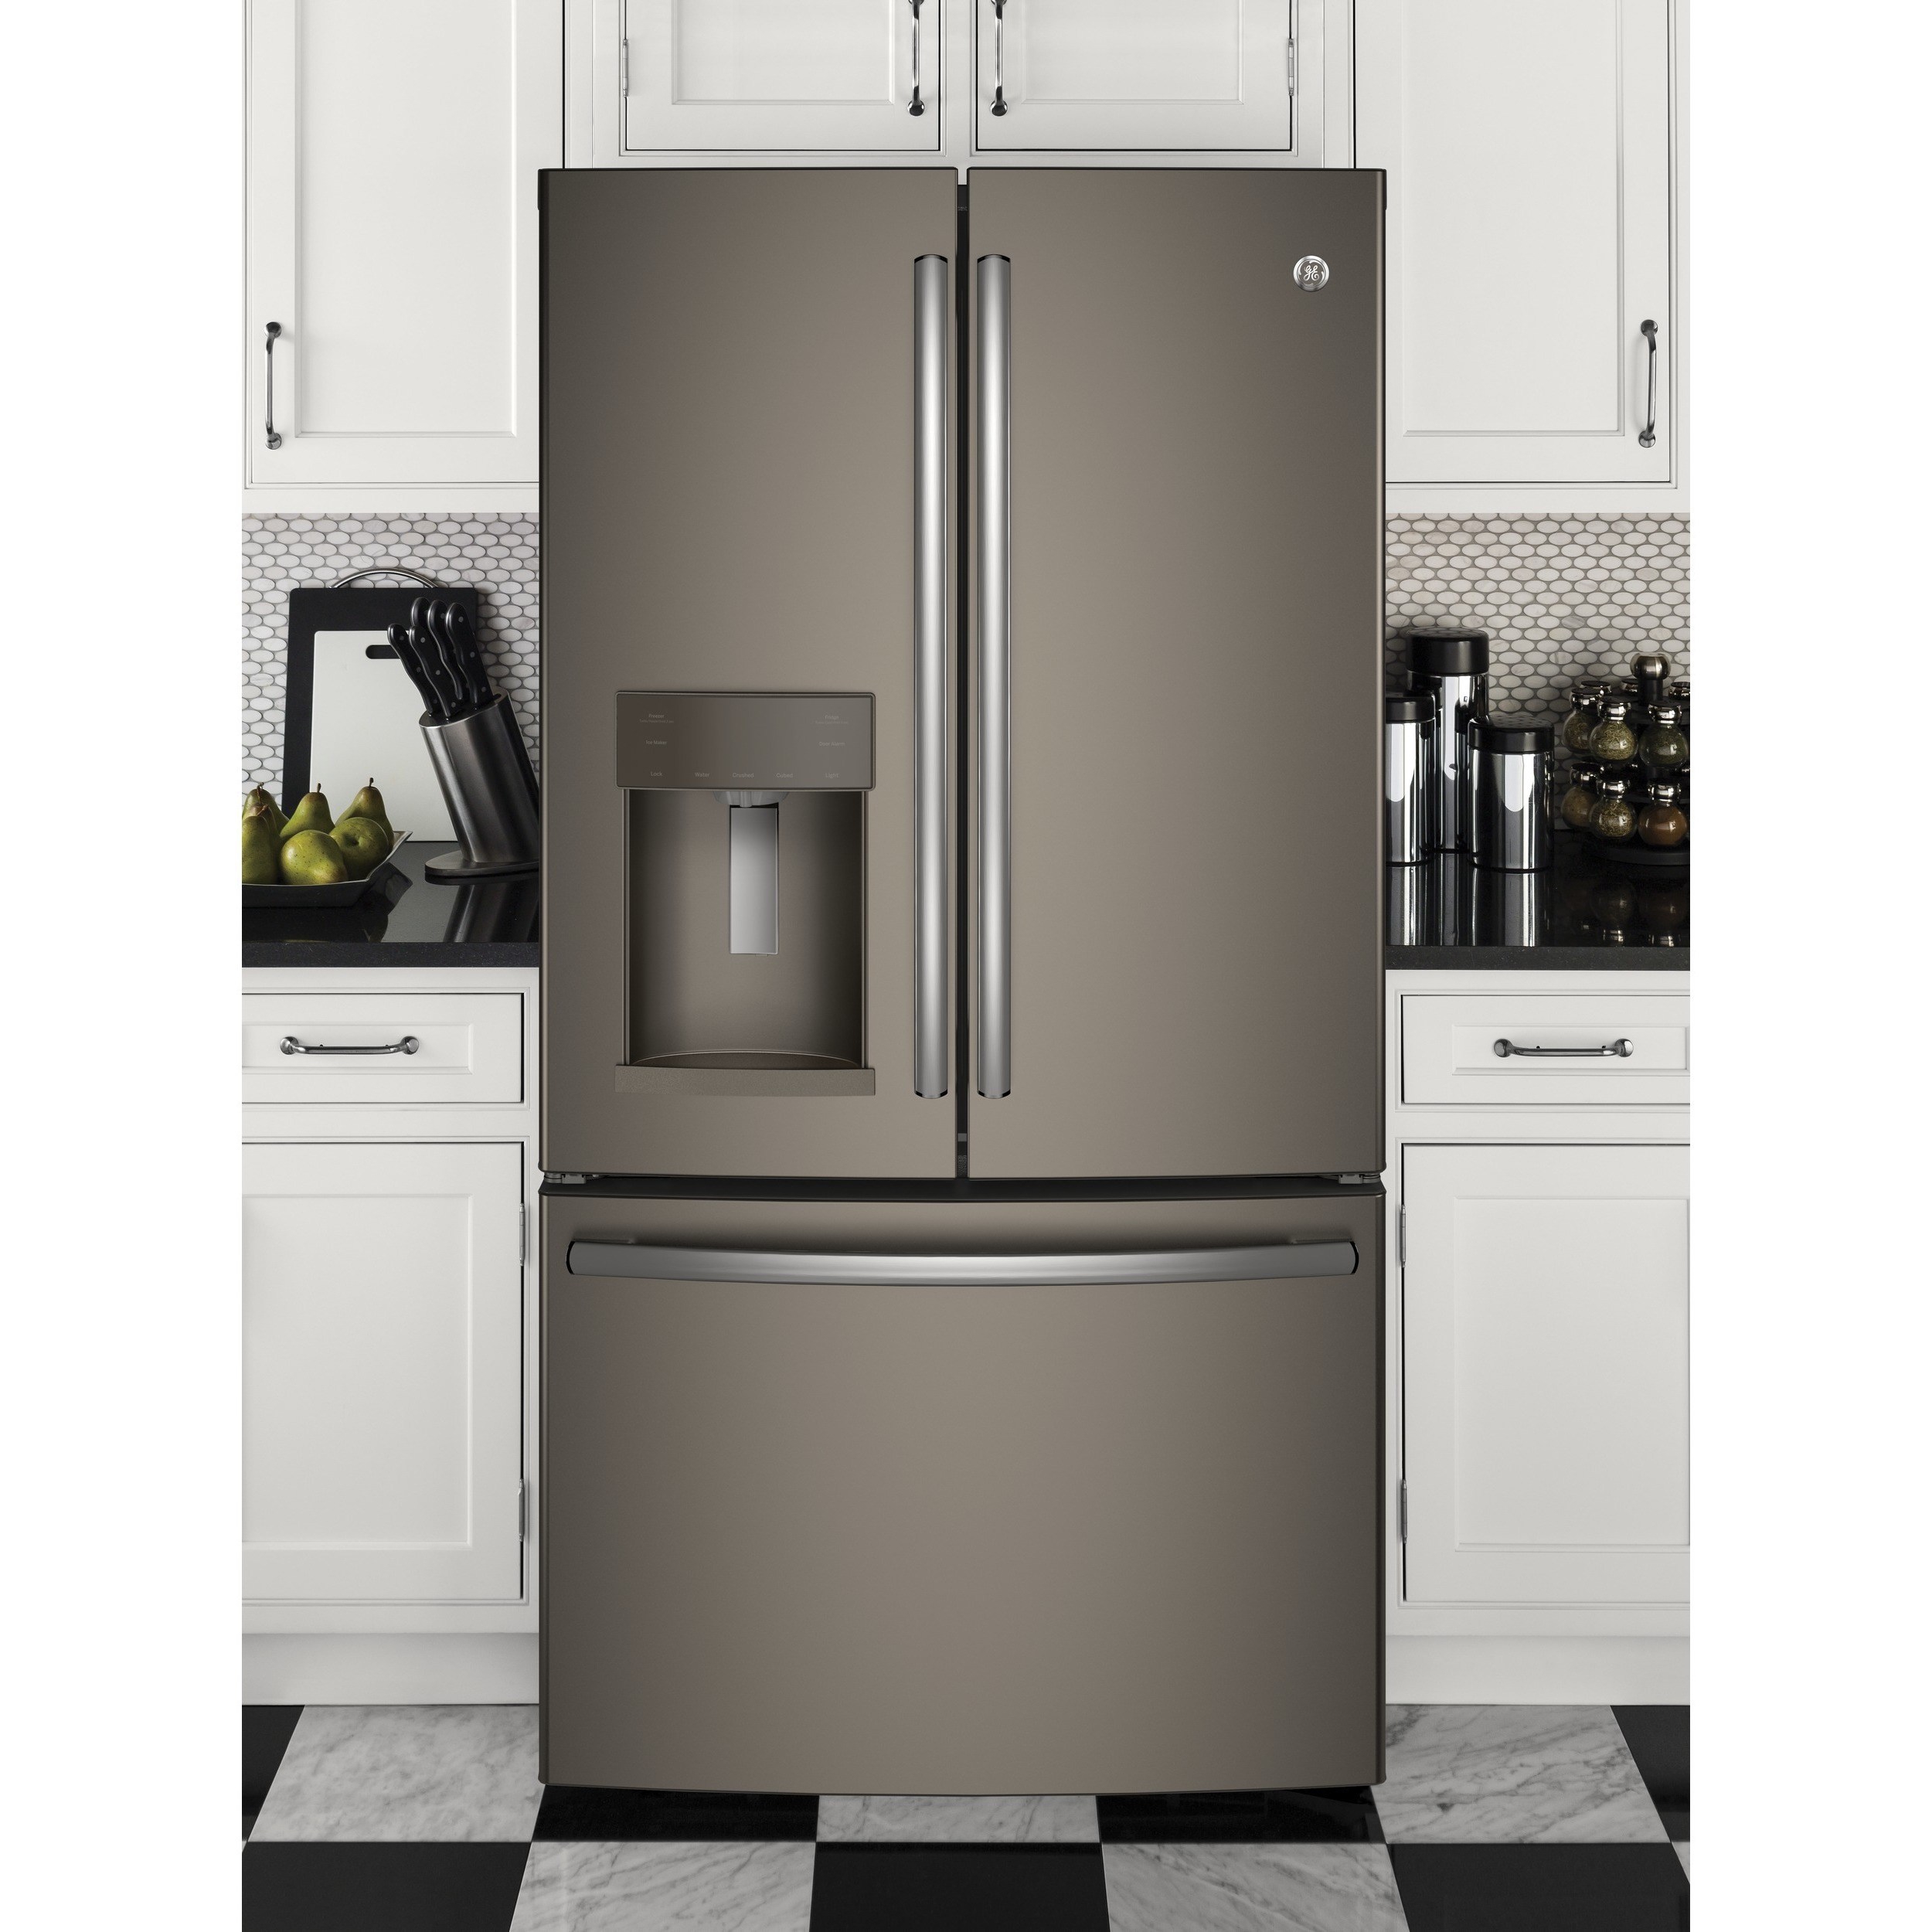 ge-appliances-energy-star-27-8-cubic-foot-french-door-refrigerator